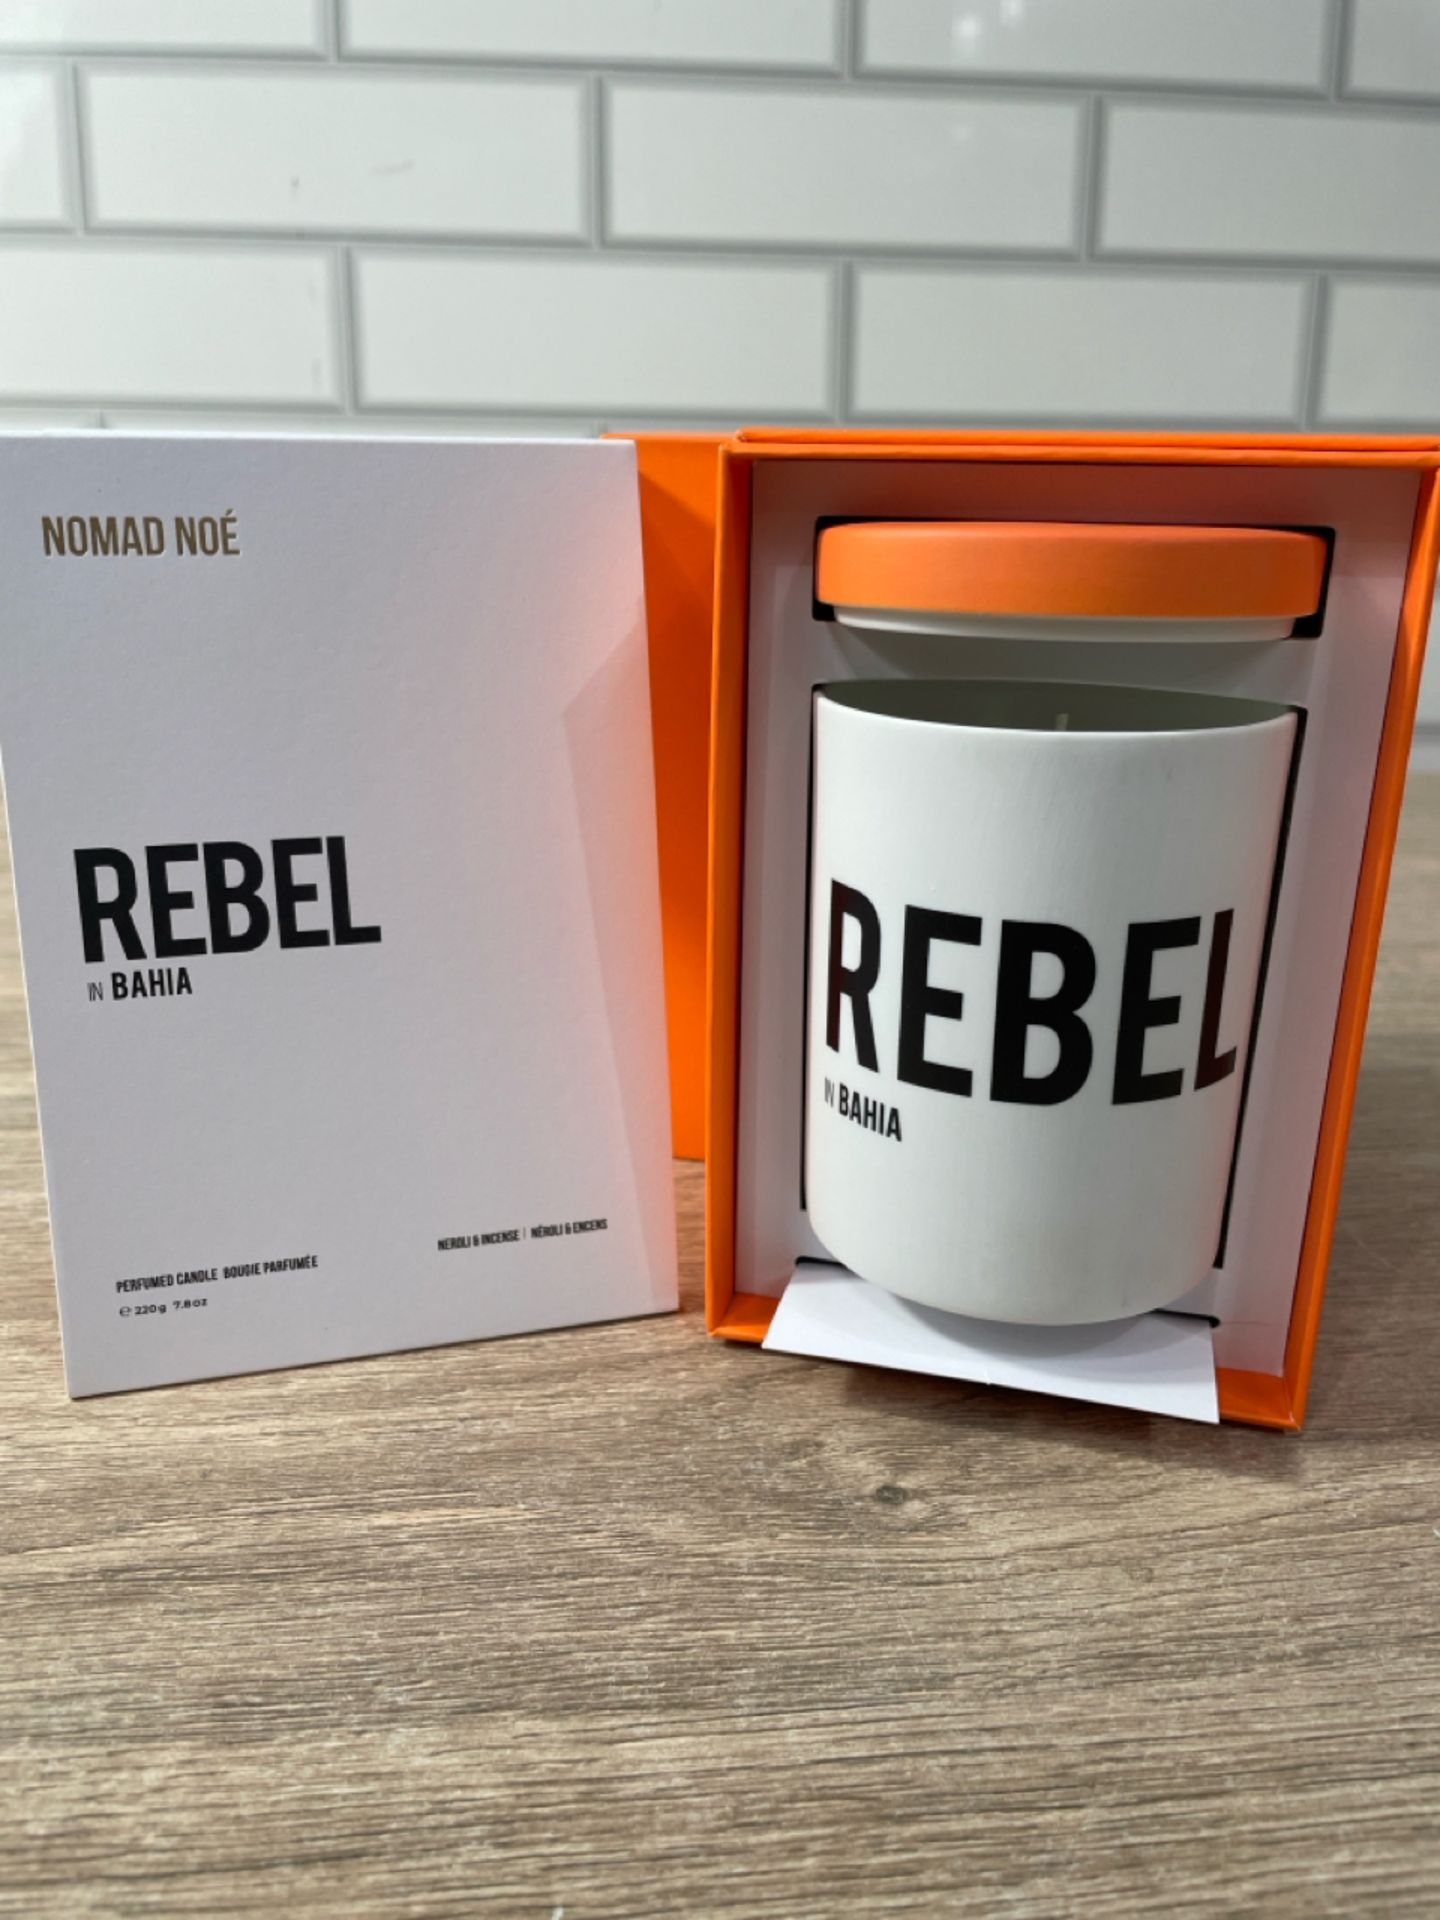 Rebel Scented Candle from Nomad Noe - Bild 2 aus 4